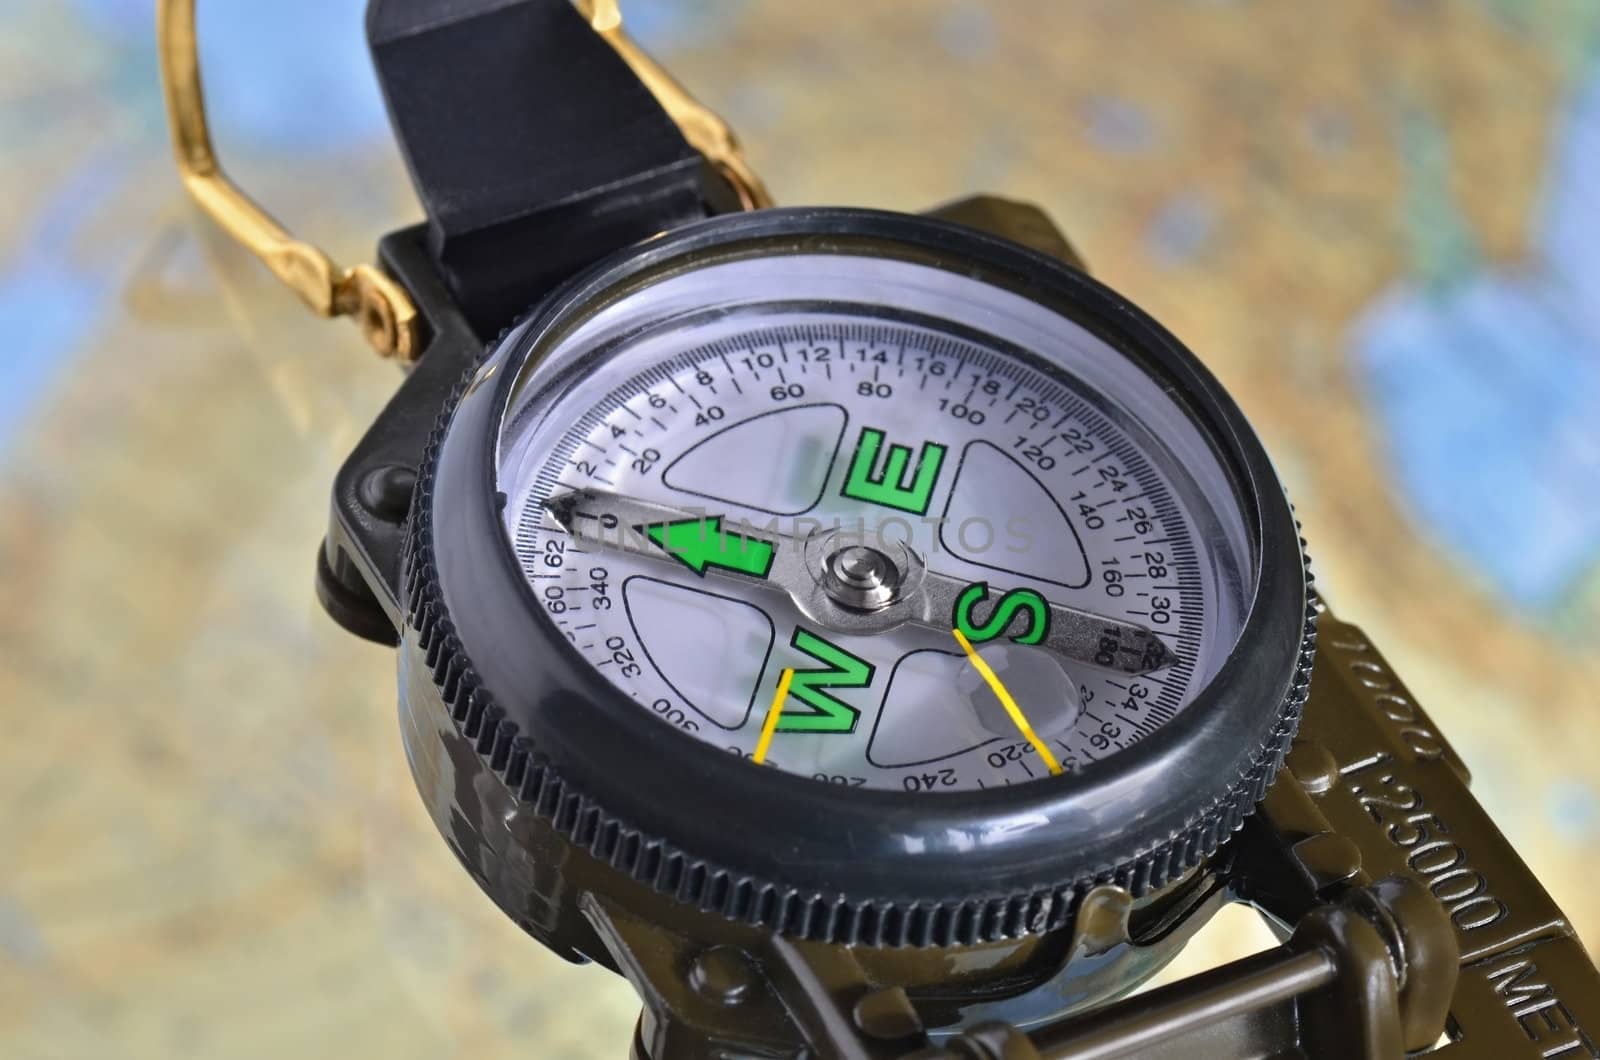 Military style compass on out of focus map background